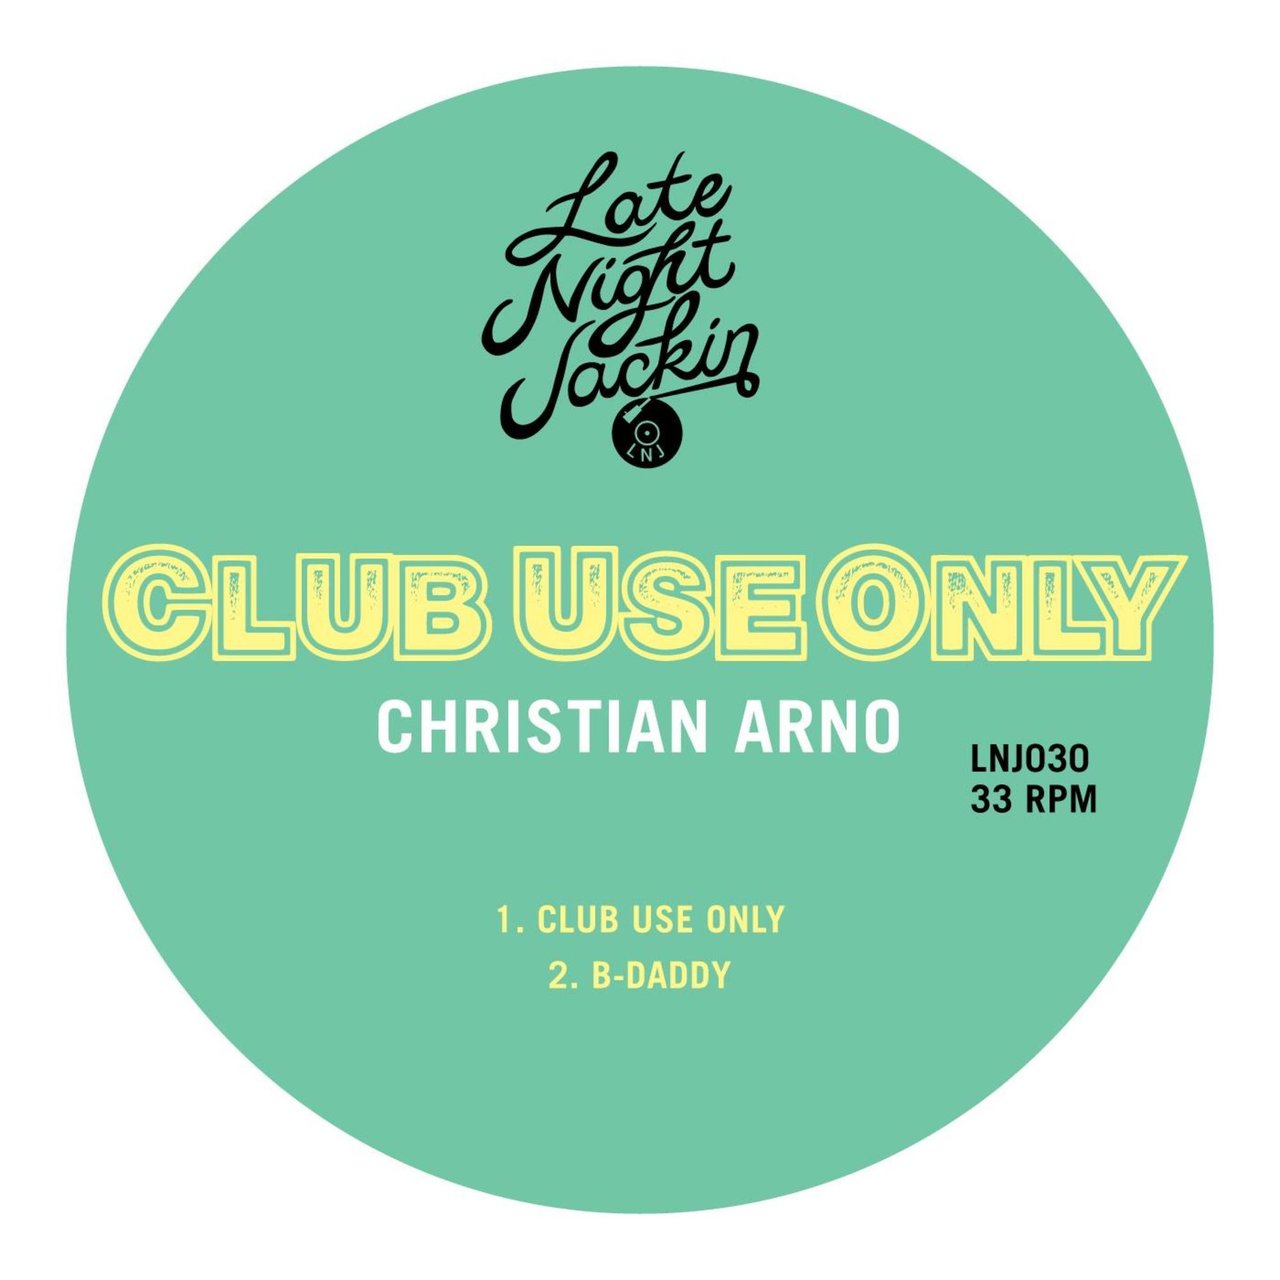 Christian Arno - Club Use Only / Late Night Jackin